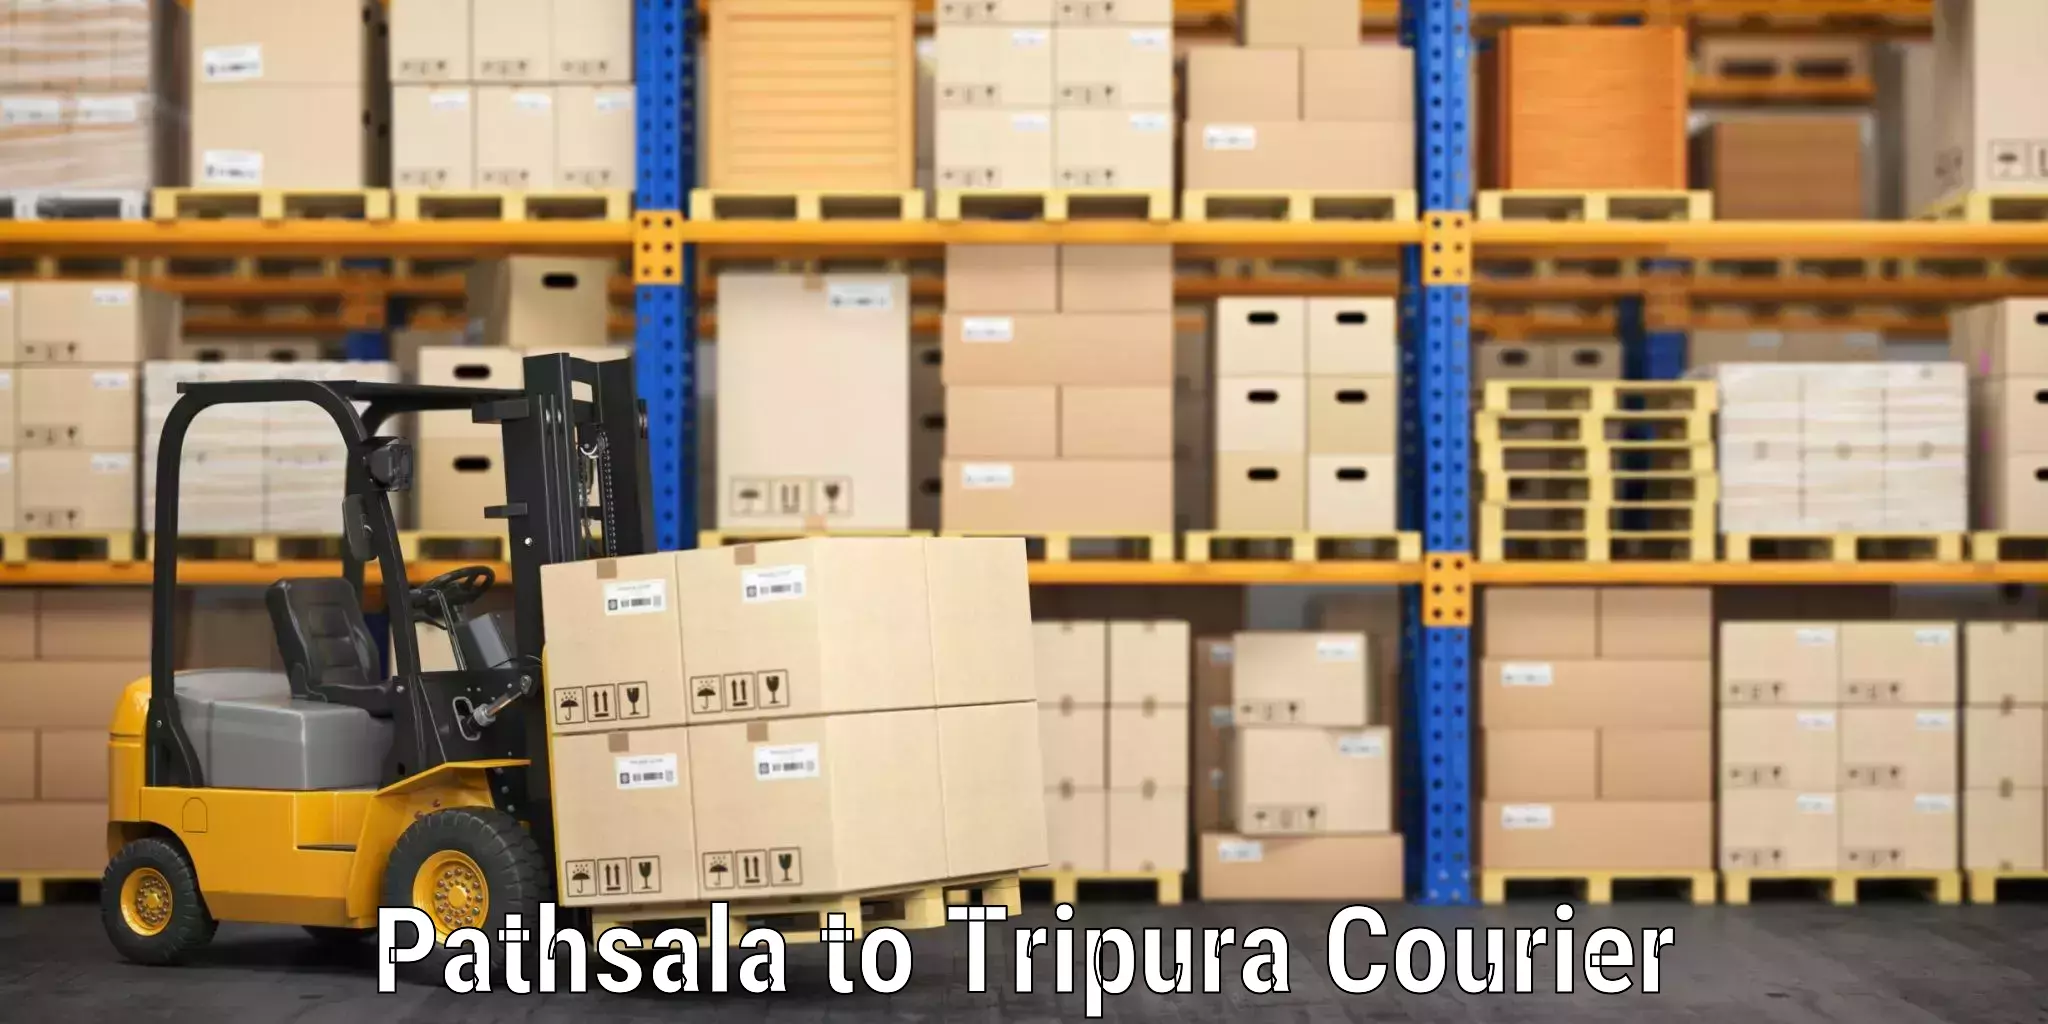 Instant baggage transport quote Pathsala to Tripura